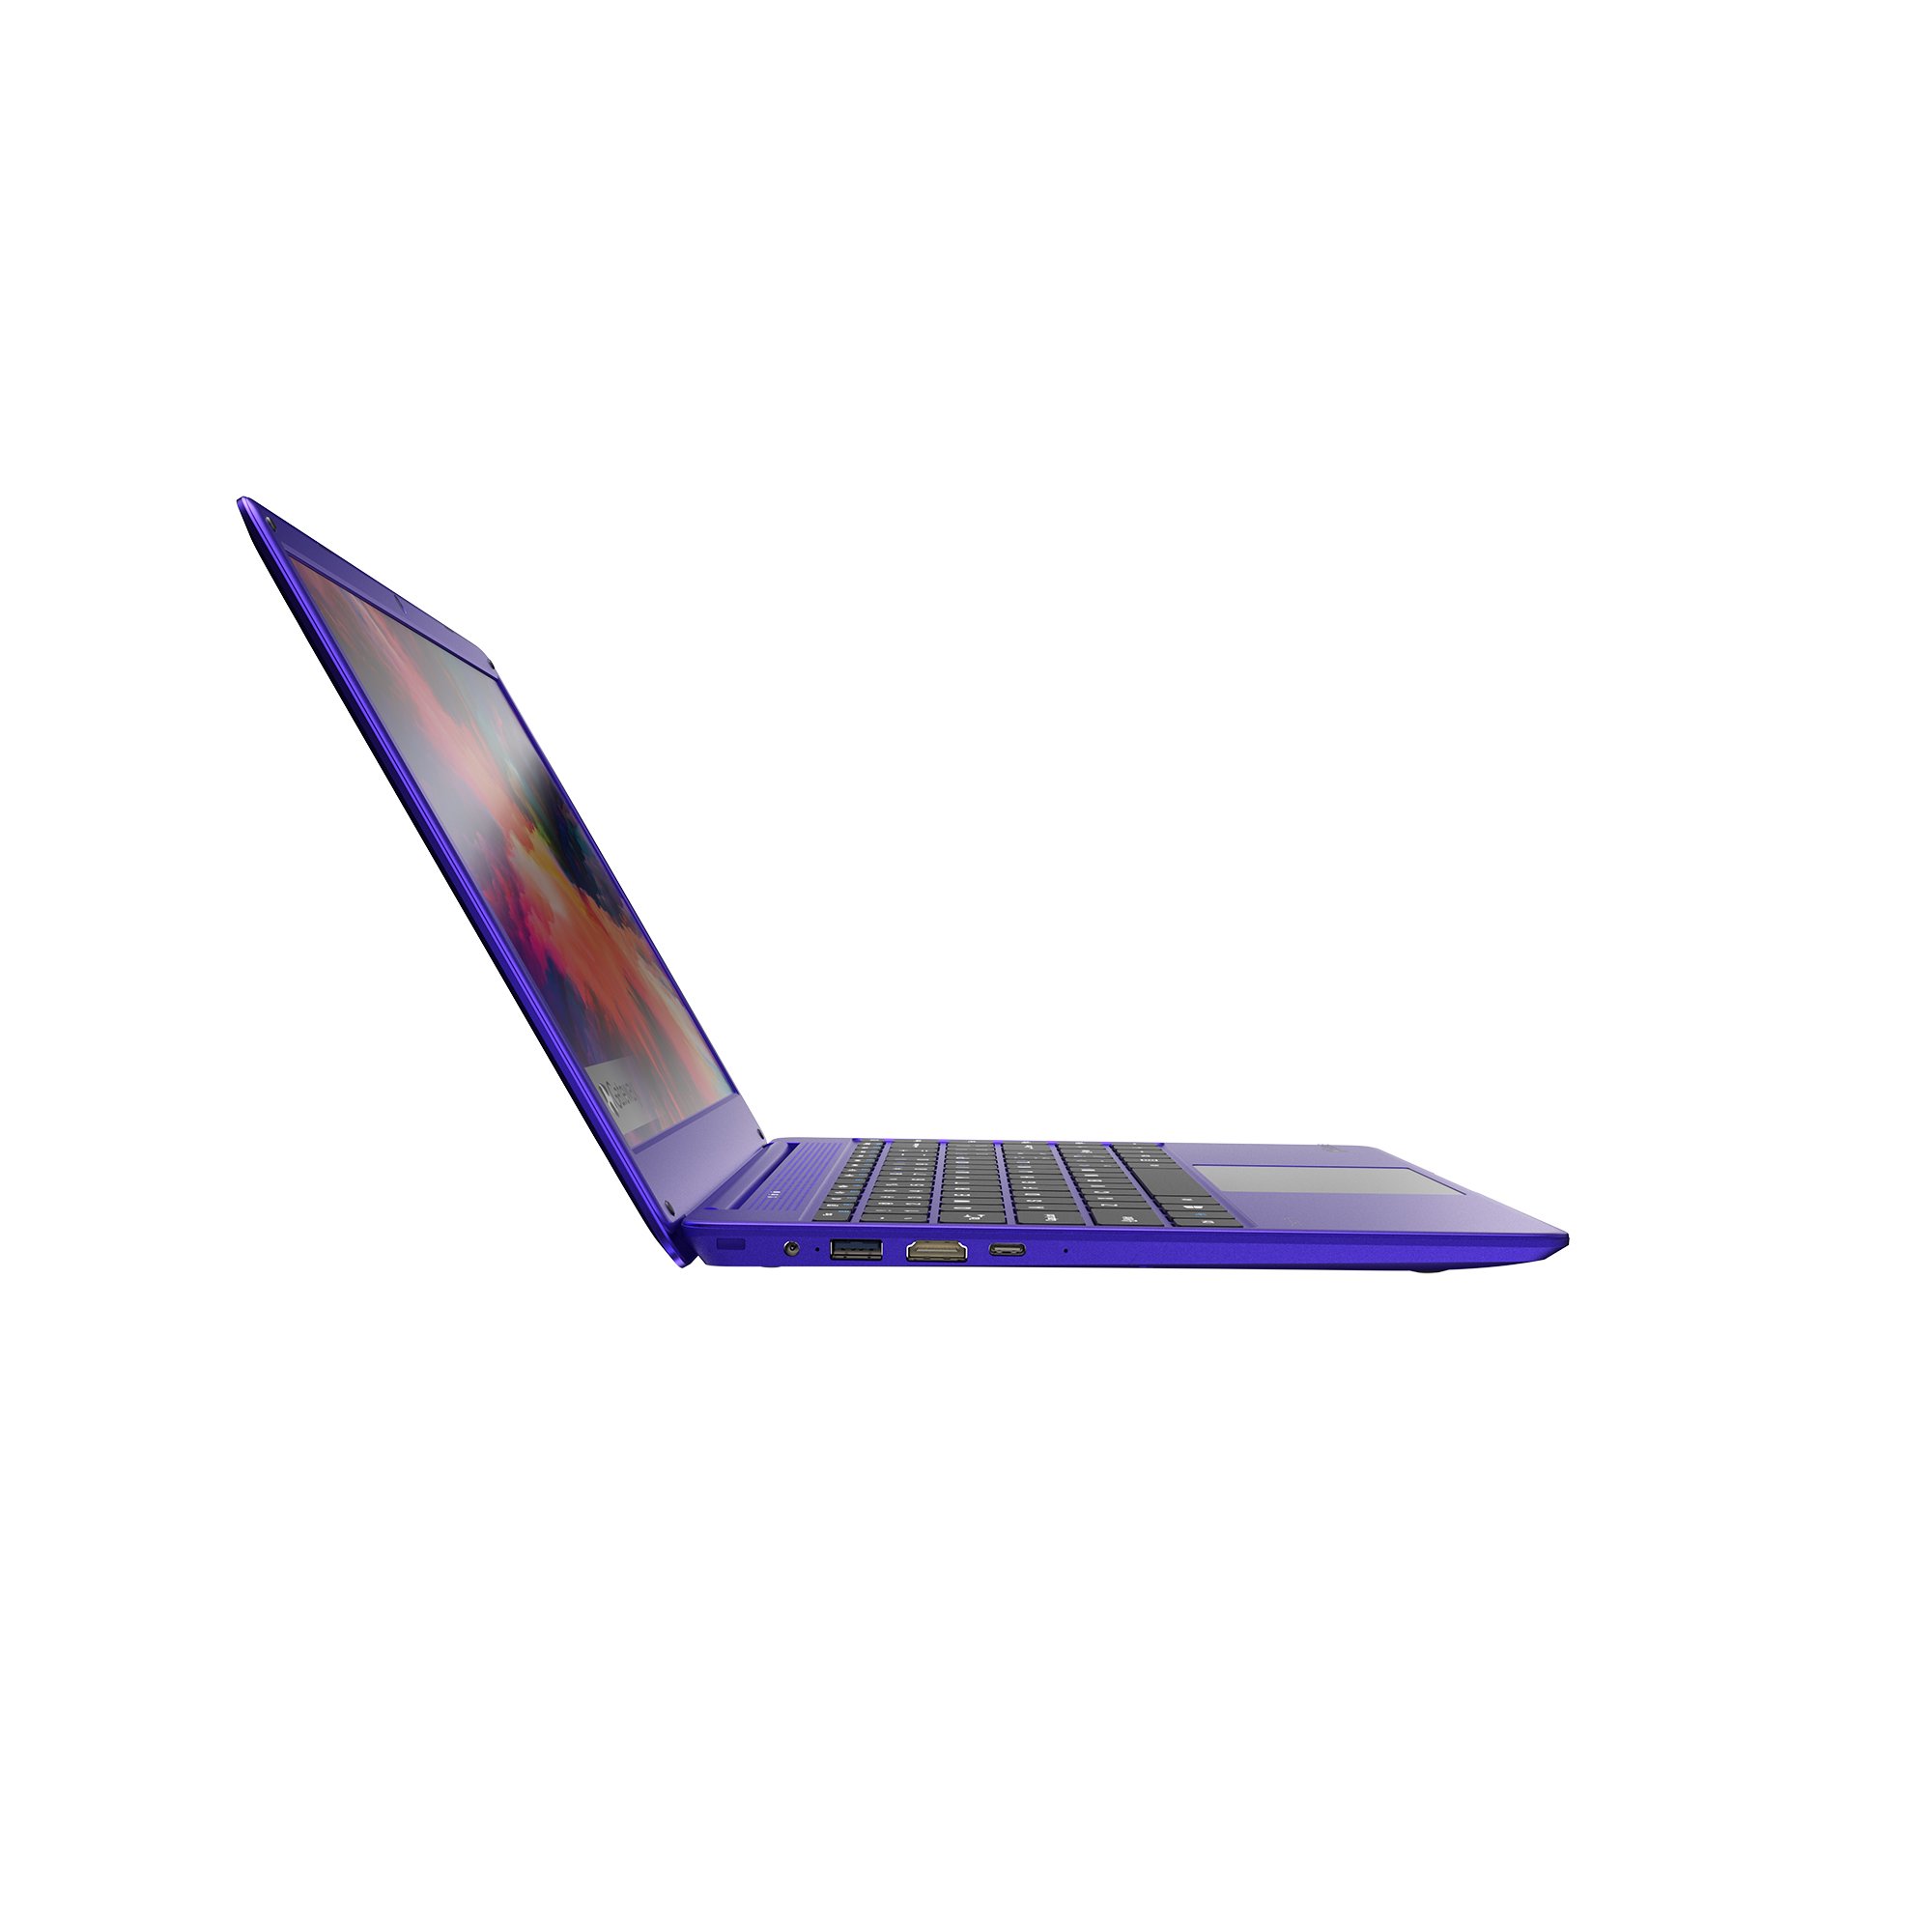 Gateway Ultra Slim Notebook Core i3 1115G4 14.1 ” FHD LCD IPS 4 GB memory RAM 128 GB M.2 SSD storage and NVMe supported Built-in Fingerprint windows 10 purple color GWTN1416pR